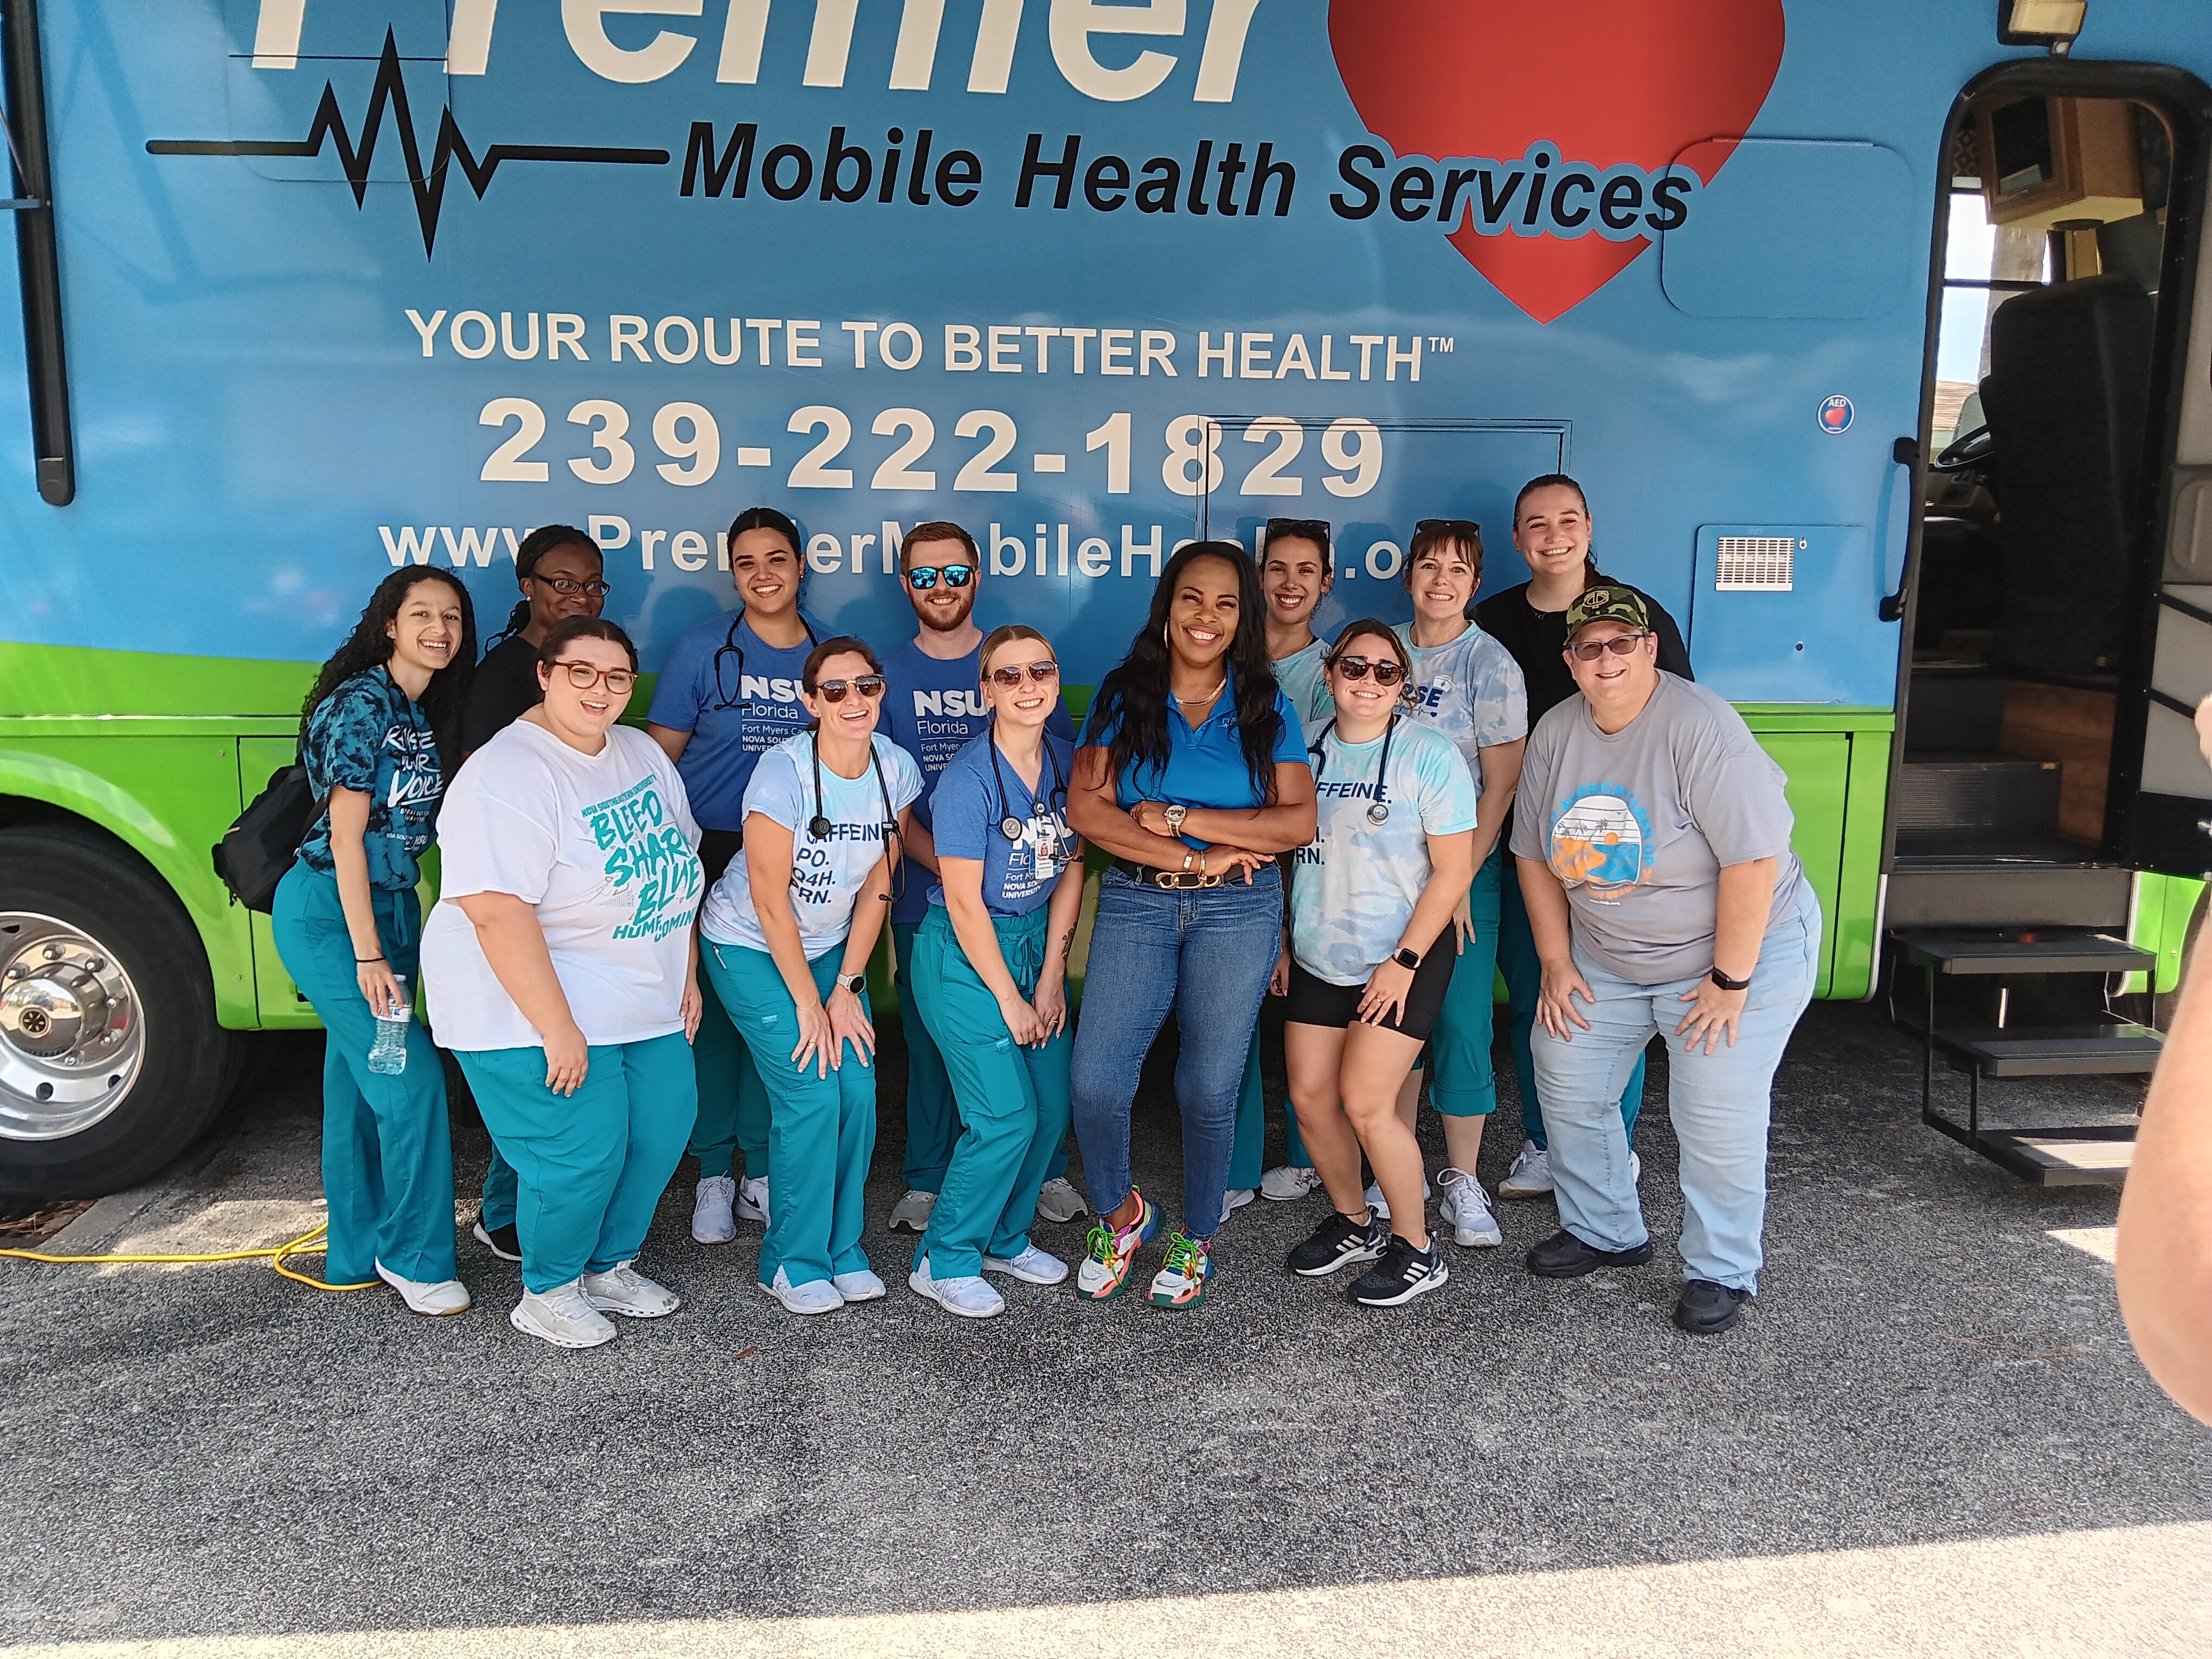 Premier Mobile Health Services provides complimentary school physicals